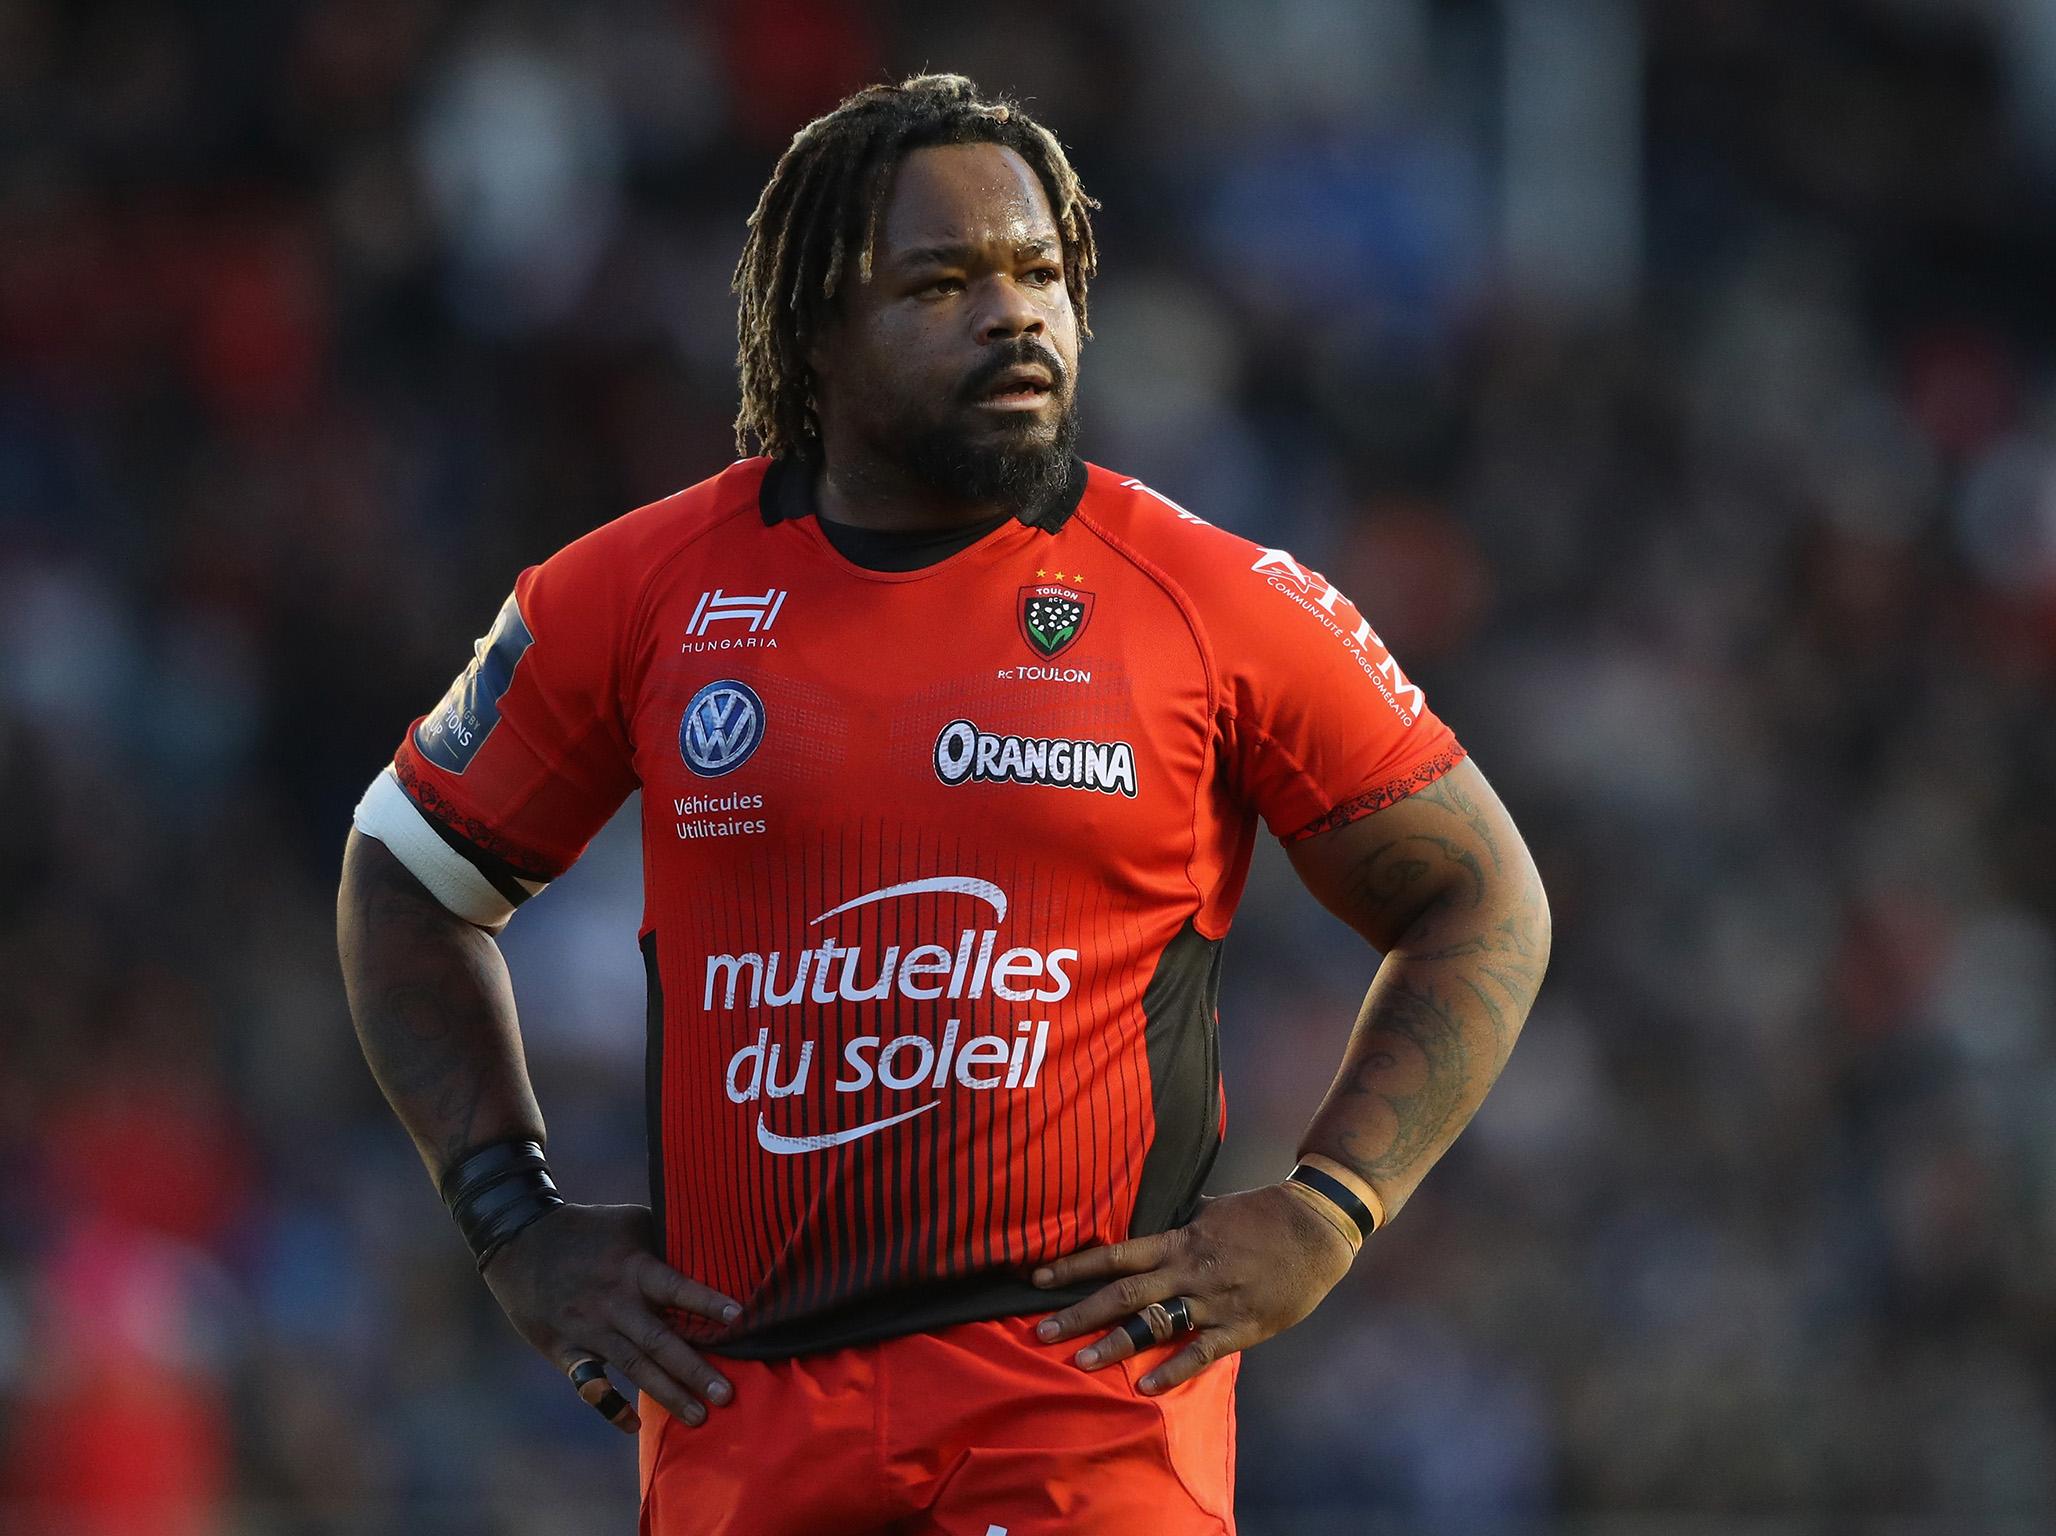 Bastareaud returns to the squad after his suspension expired (Getty)